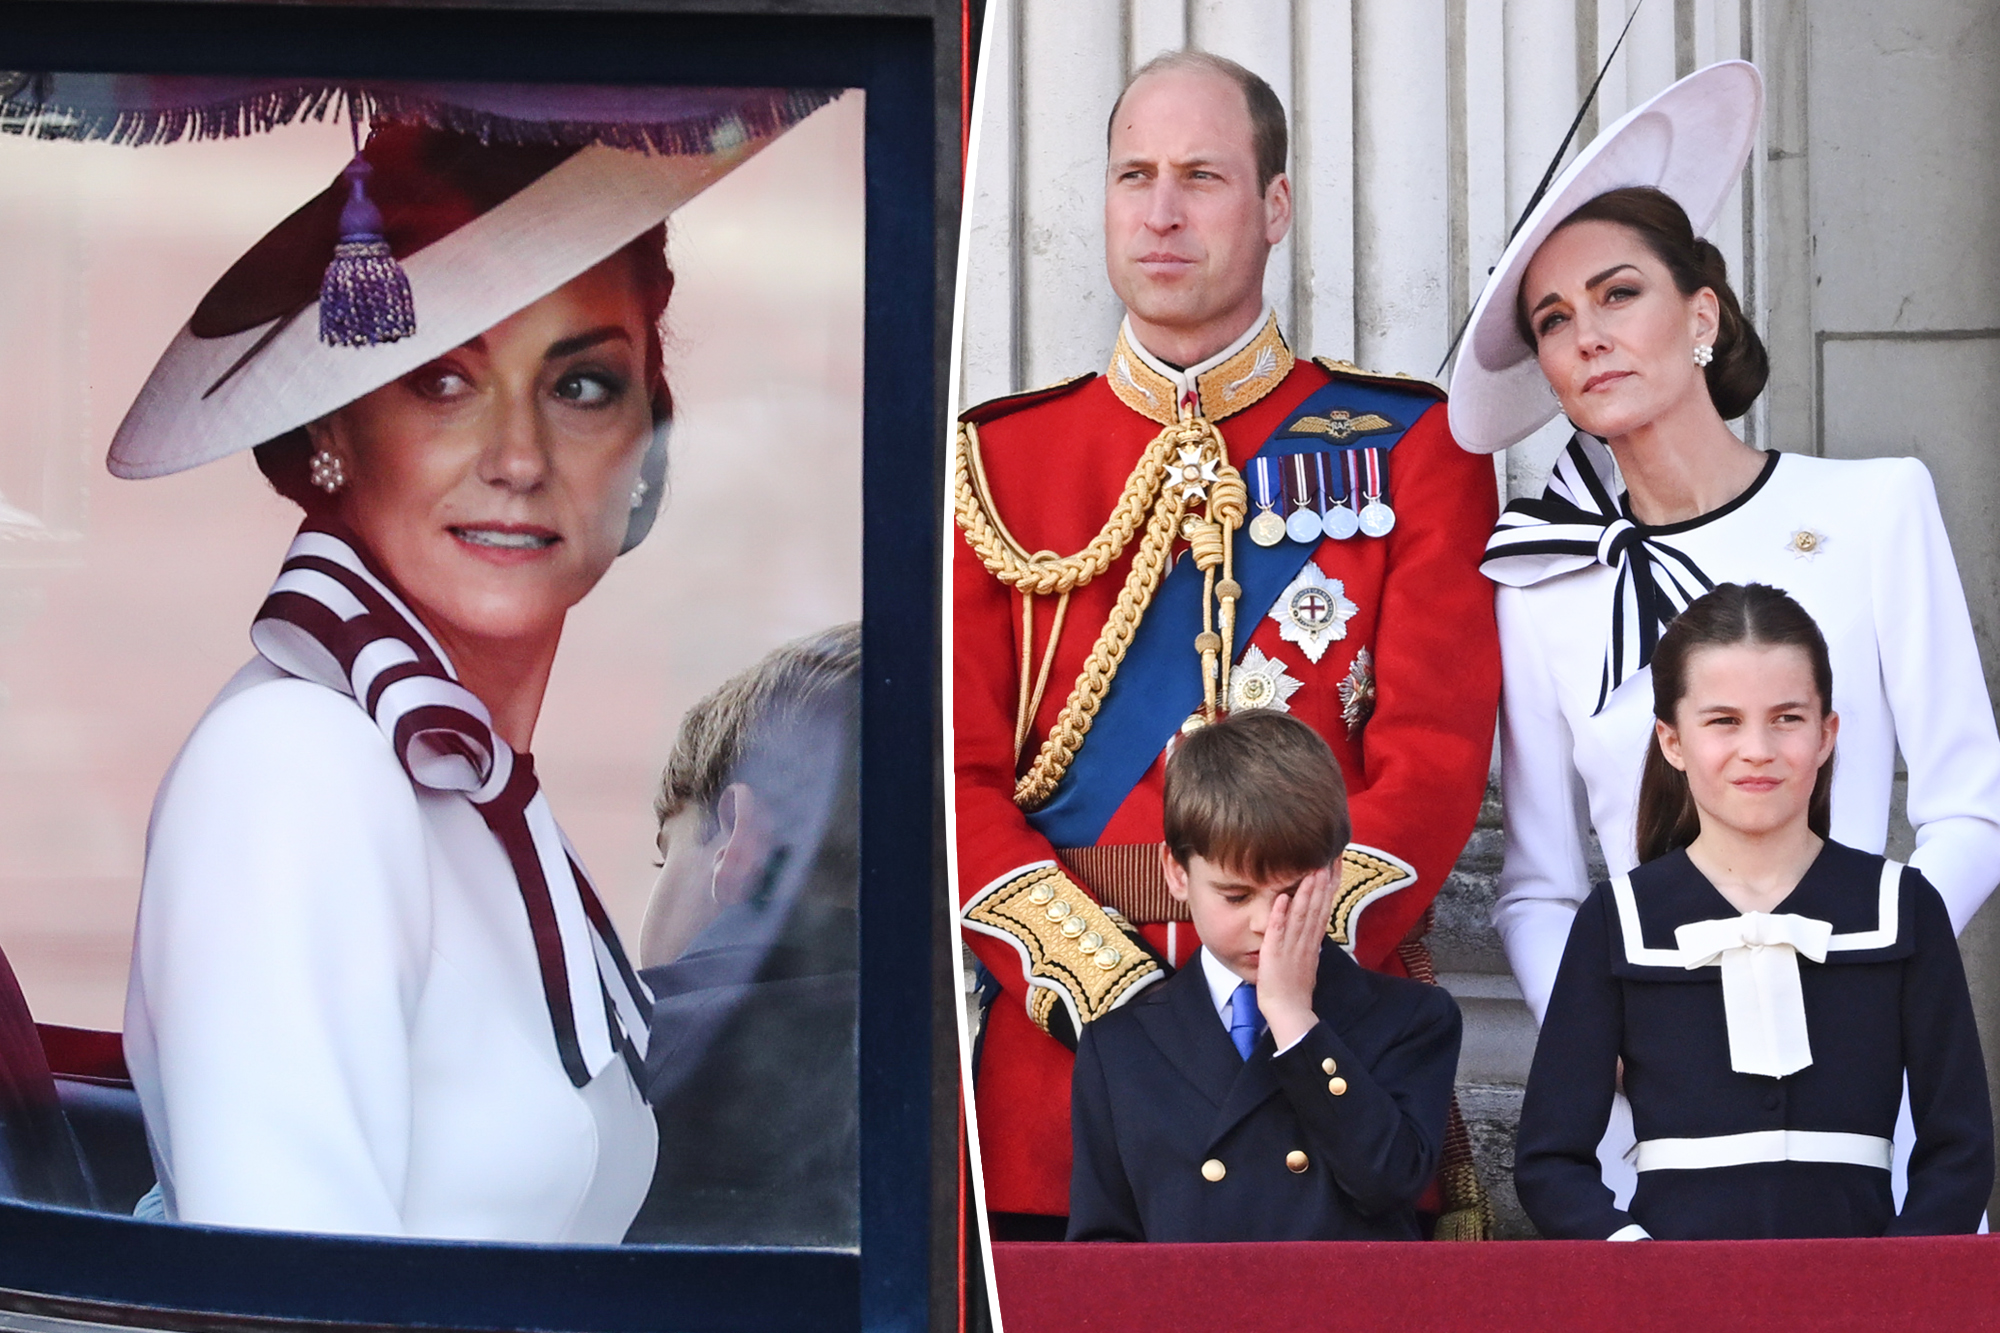 Kate Middleton's Brave Battle: Trooping the Colour Appearance Amid Cancer Struggle